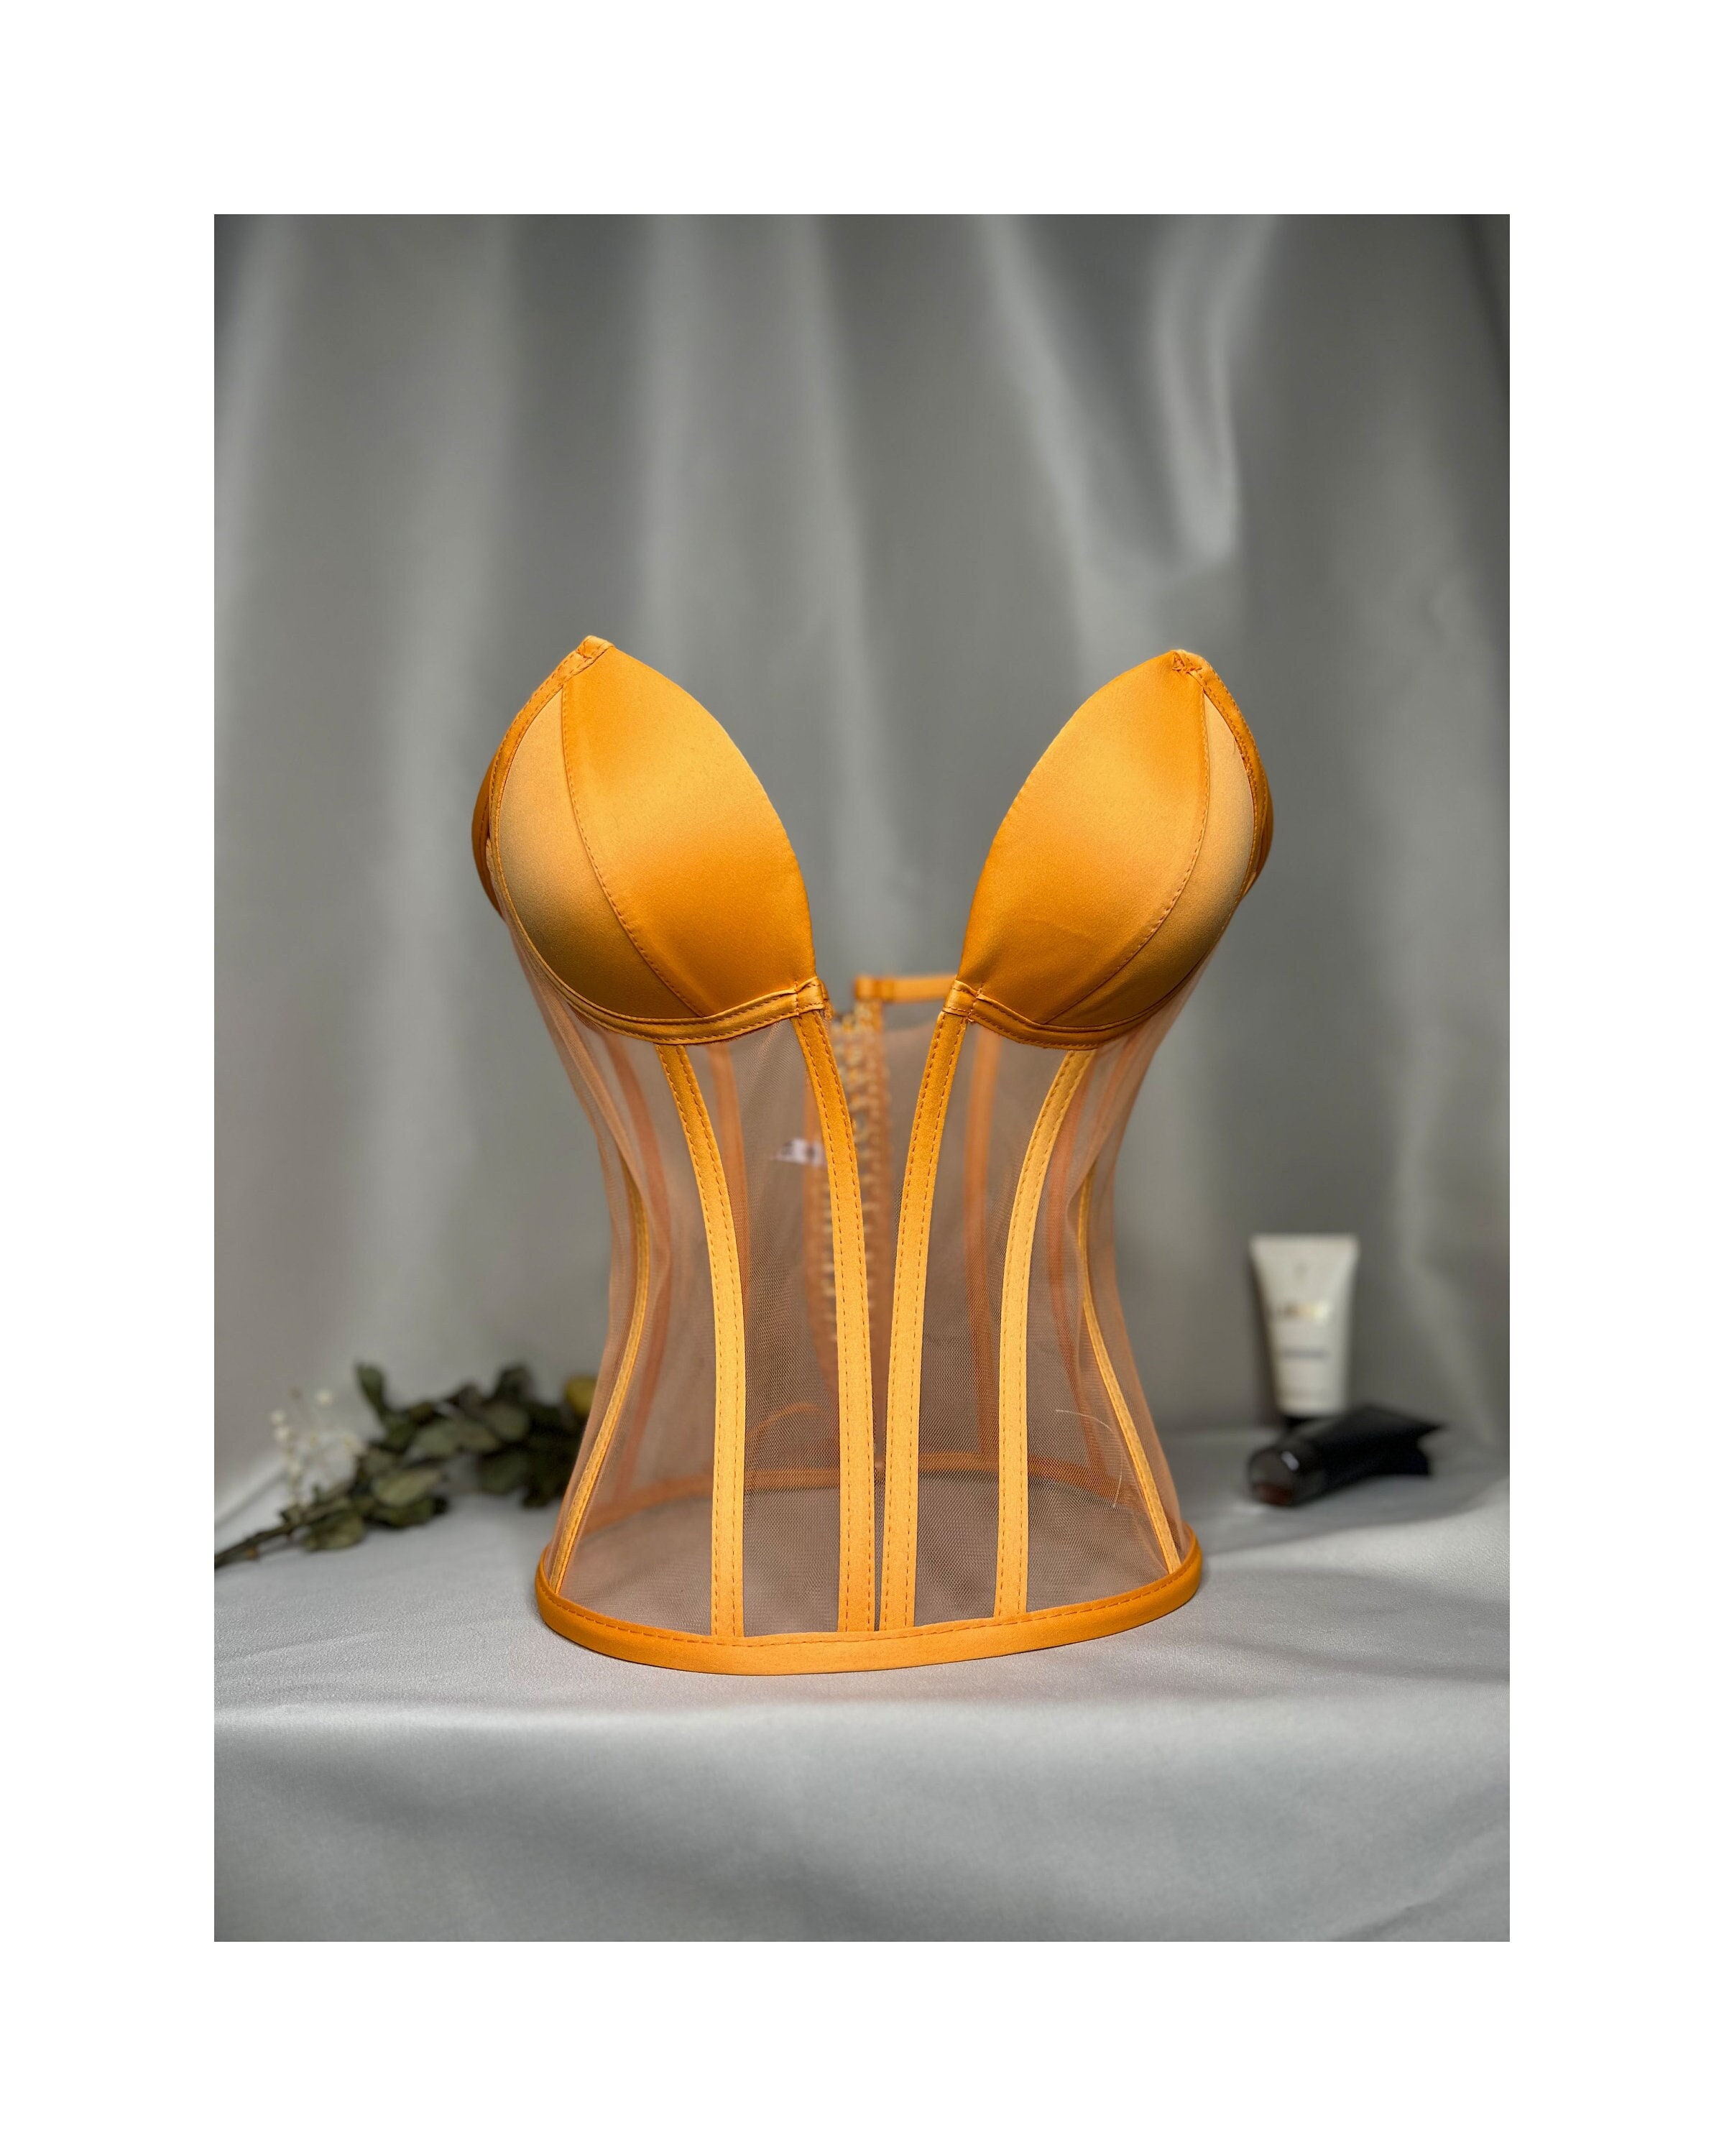 Solid Color Satin Bustier Corset Sky Blue, Orange, Yellow, Beige Gold  Perfect For Painting, Beadwork, Burlesque, Costume Making